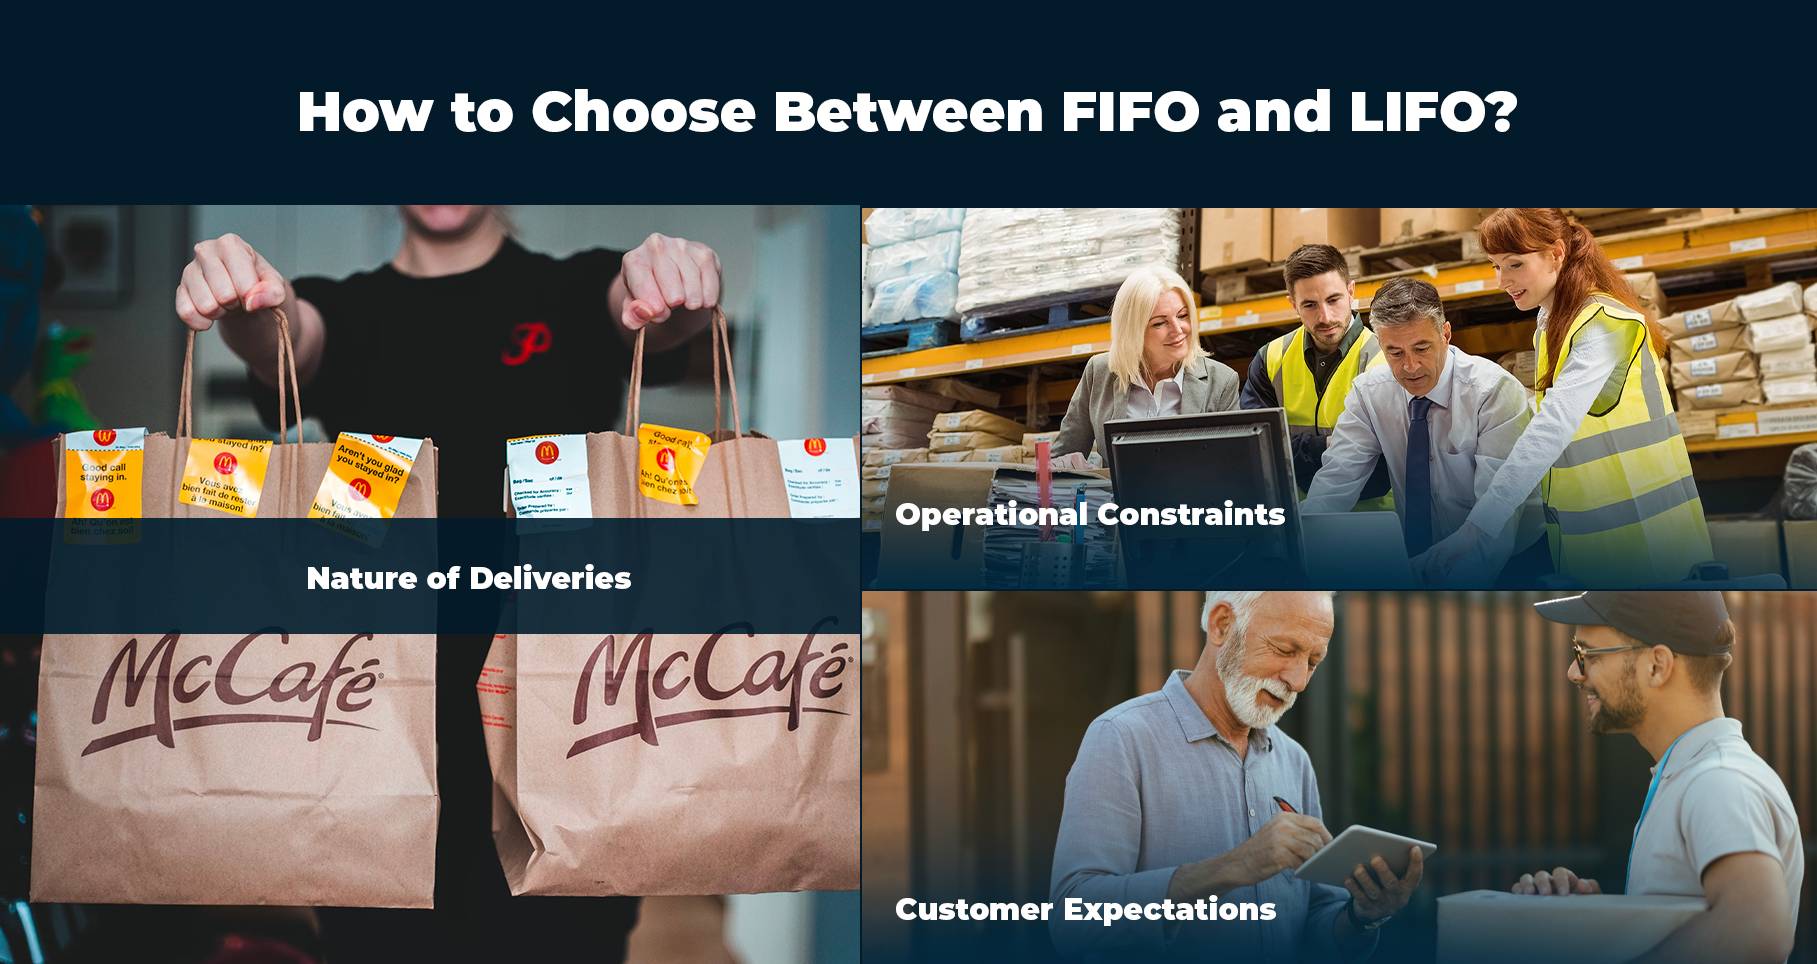 How to choose between FIFO and LIFO when creating logistics planning